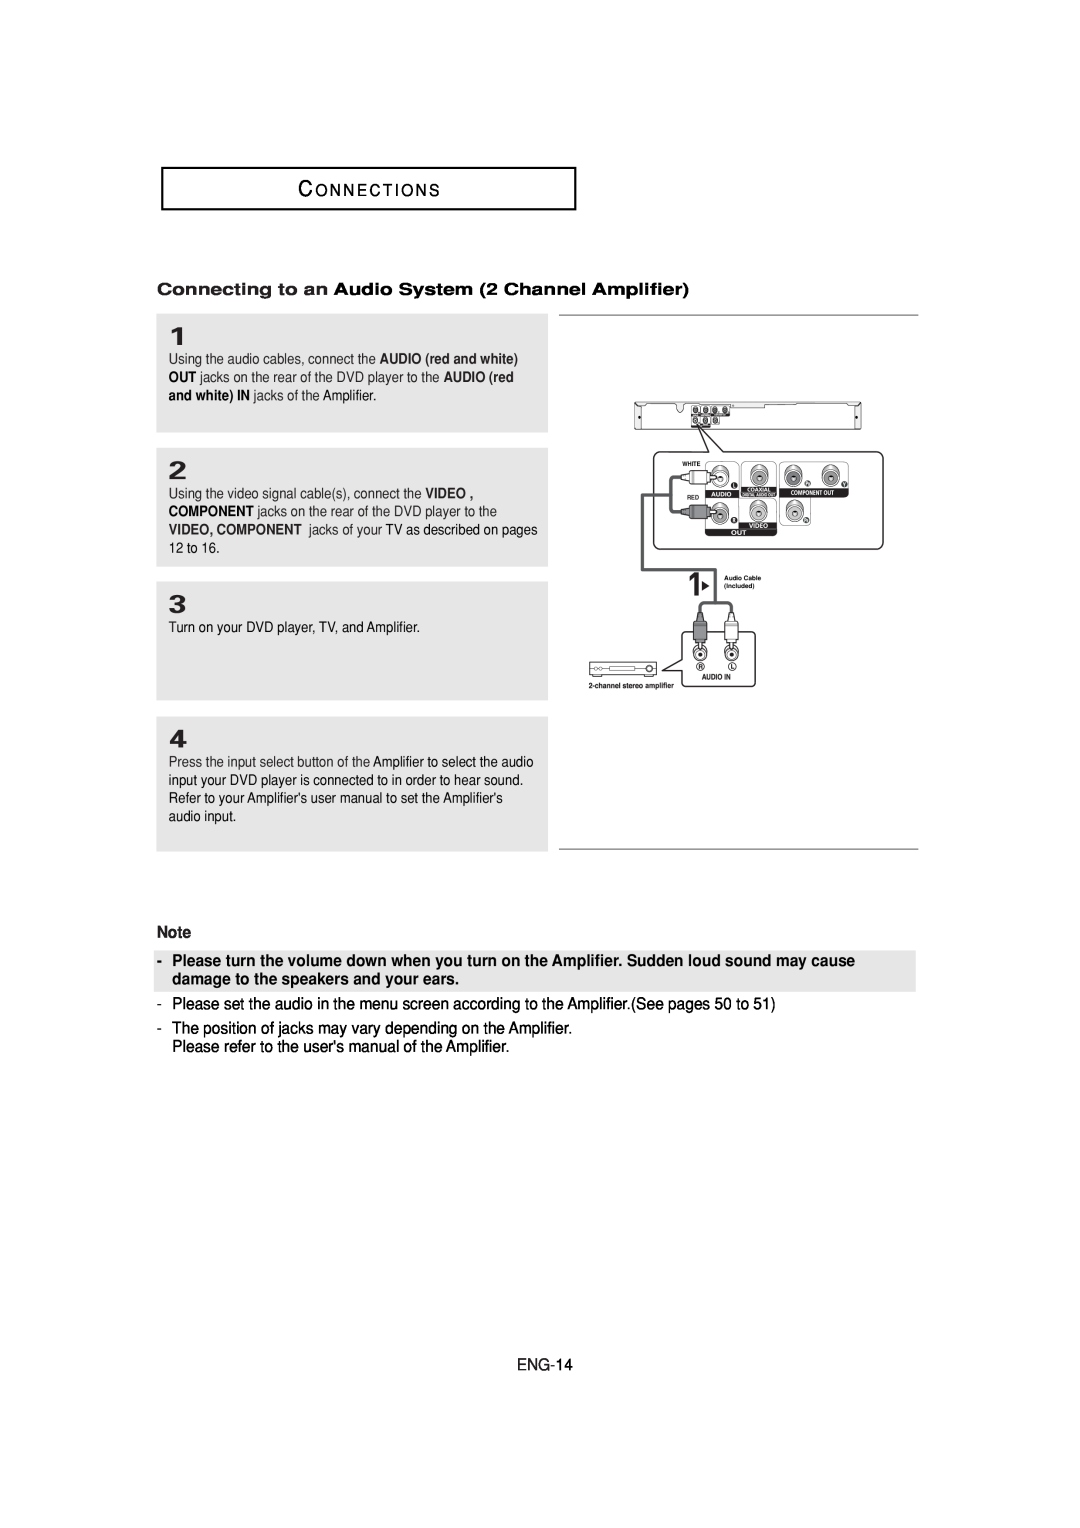 Samsung DVD-P181 manual C O N N E C T I O N S, Connecting to an Audio System 2 Channel Amplifier, ENG-14 